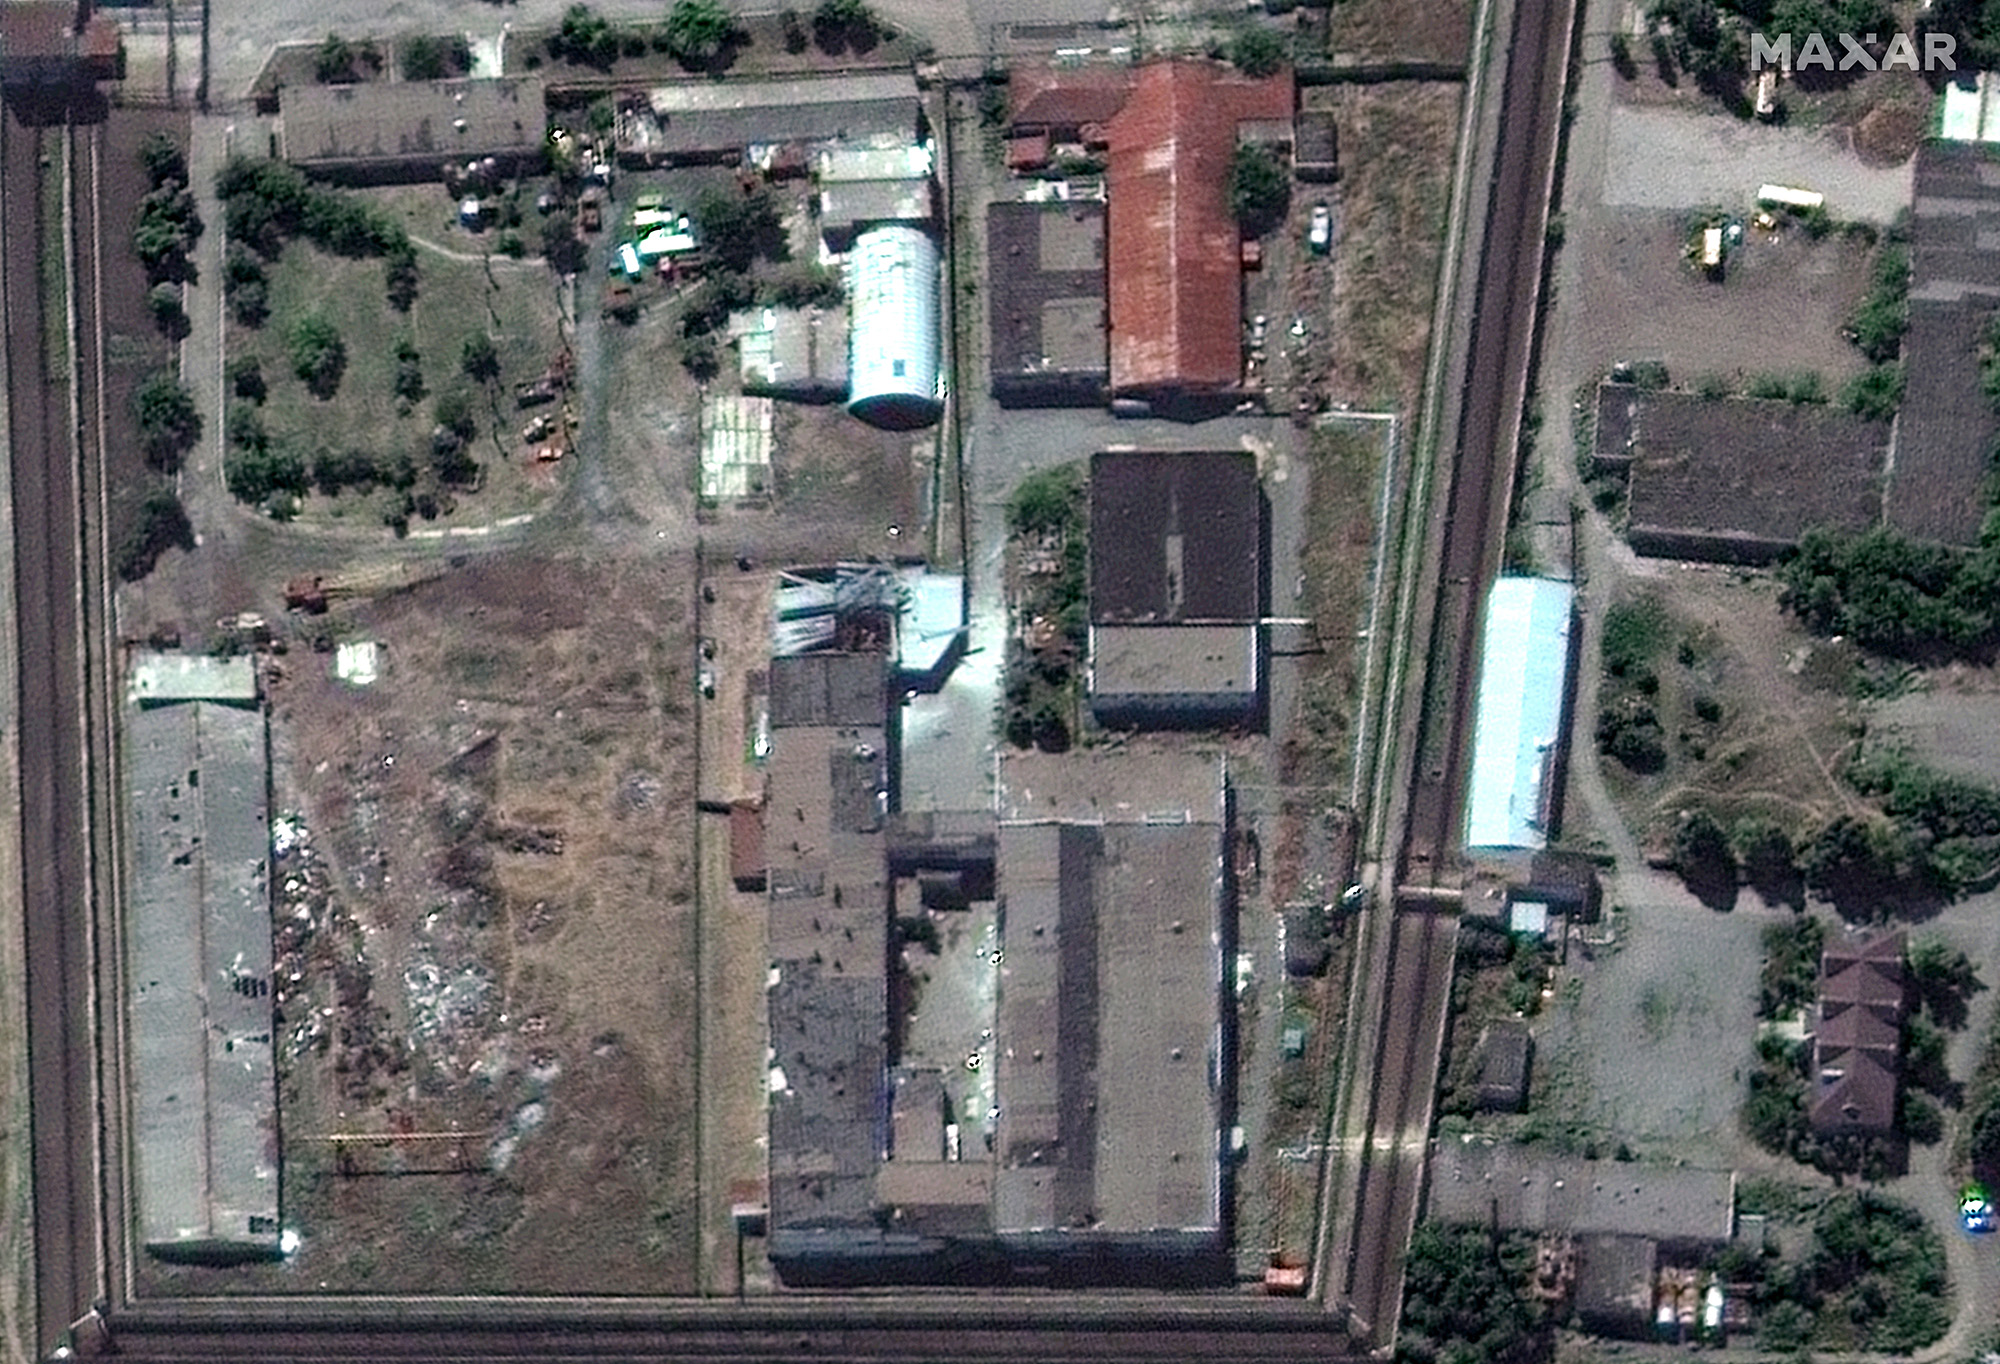 Olenivka prison in Donetsk can be seen in a satellite photo provided by Maxar Technologies on July 30 after the facility was attacked.